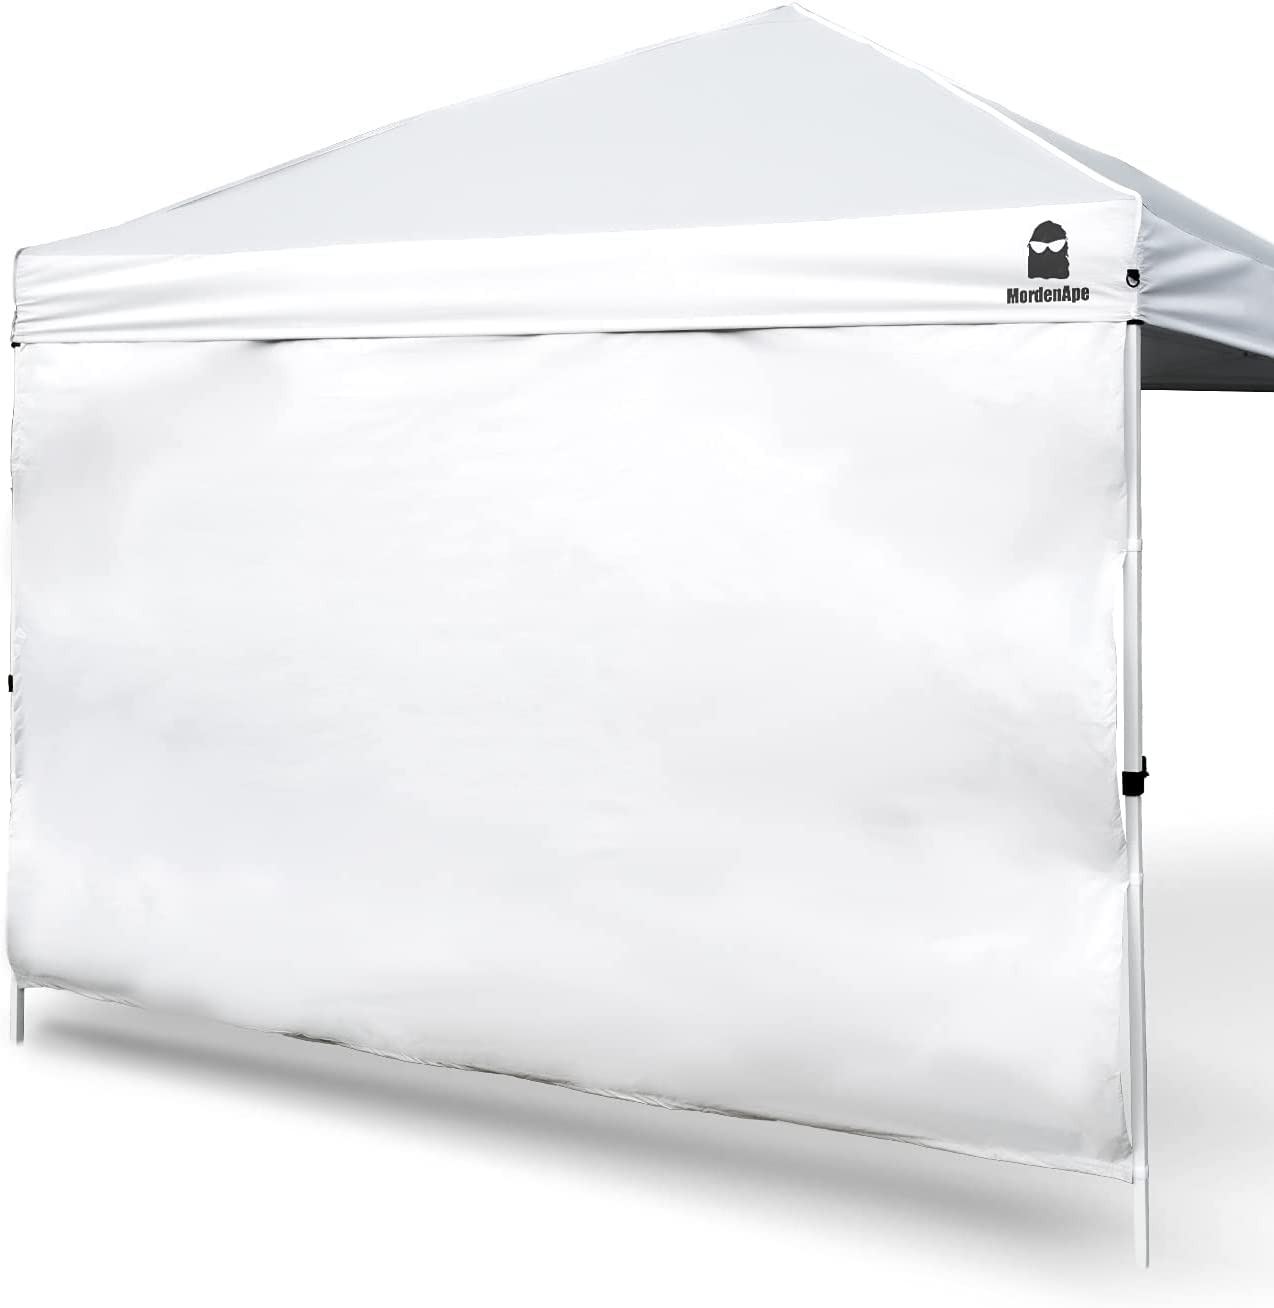 Sunshade Sidewall for 10X10 Pop up Canopy - Straight Leg, Instant Wall, (White)